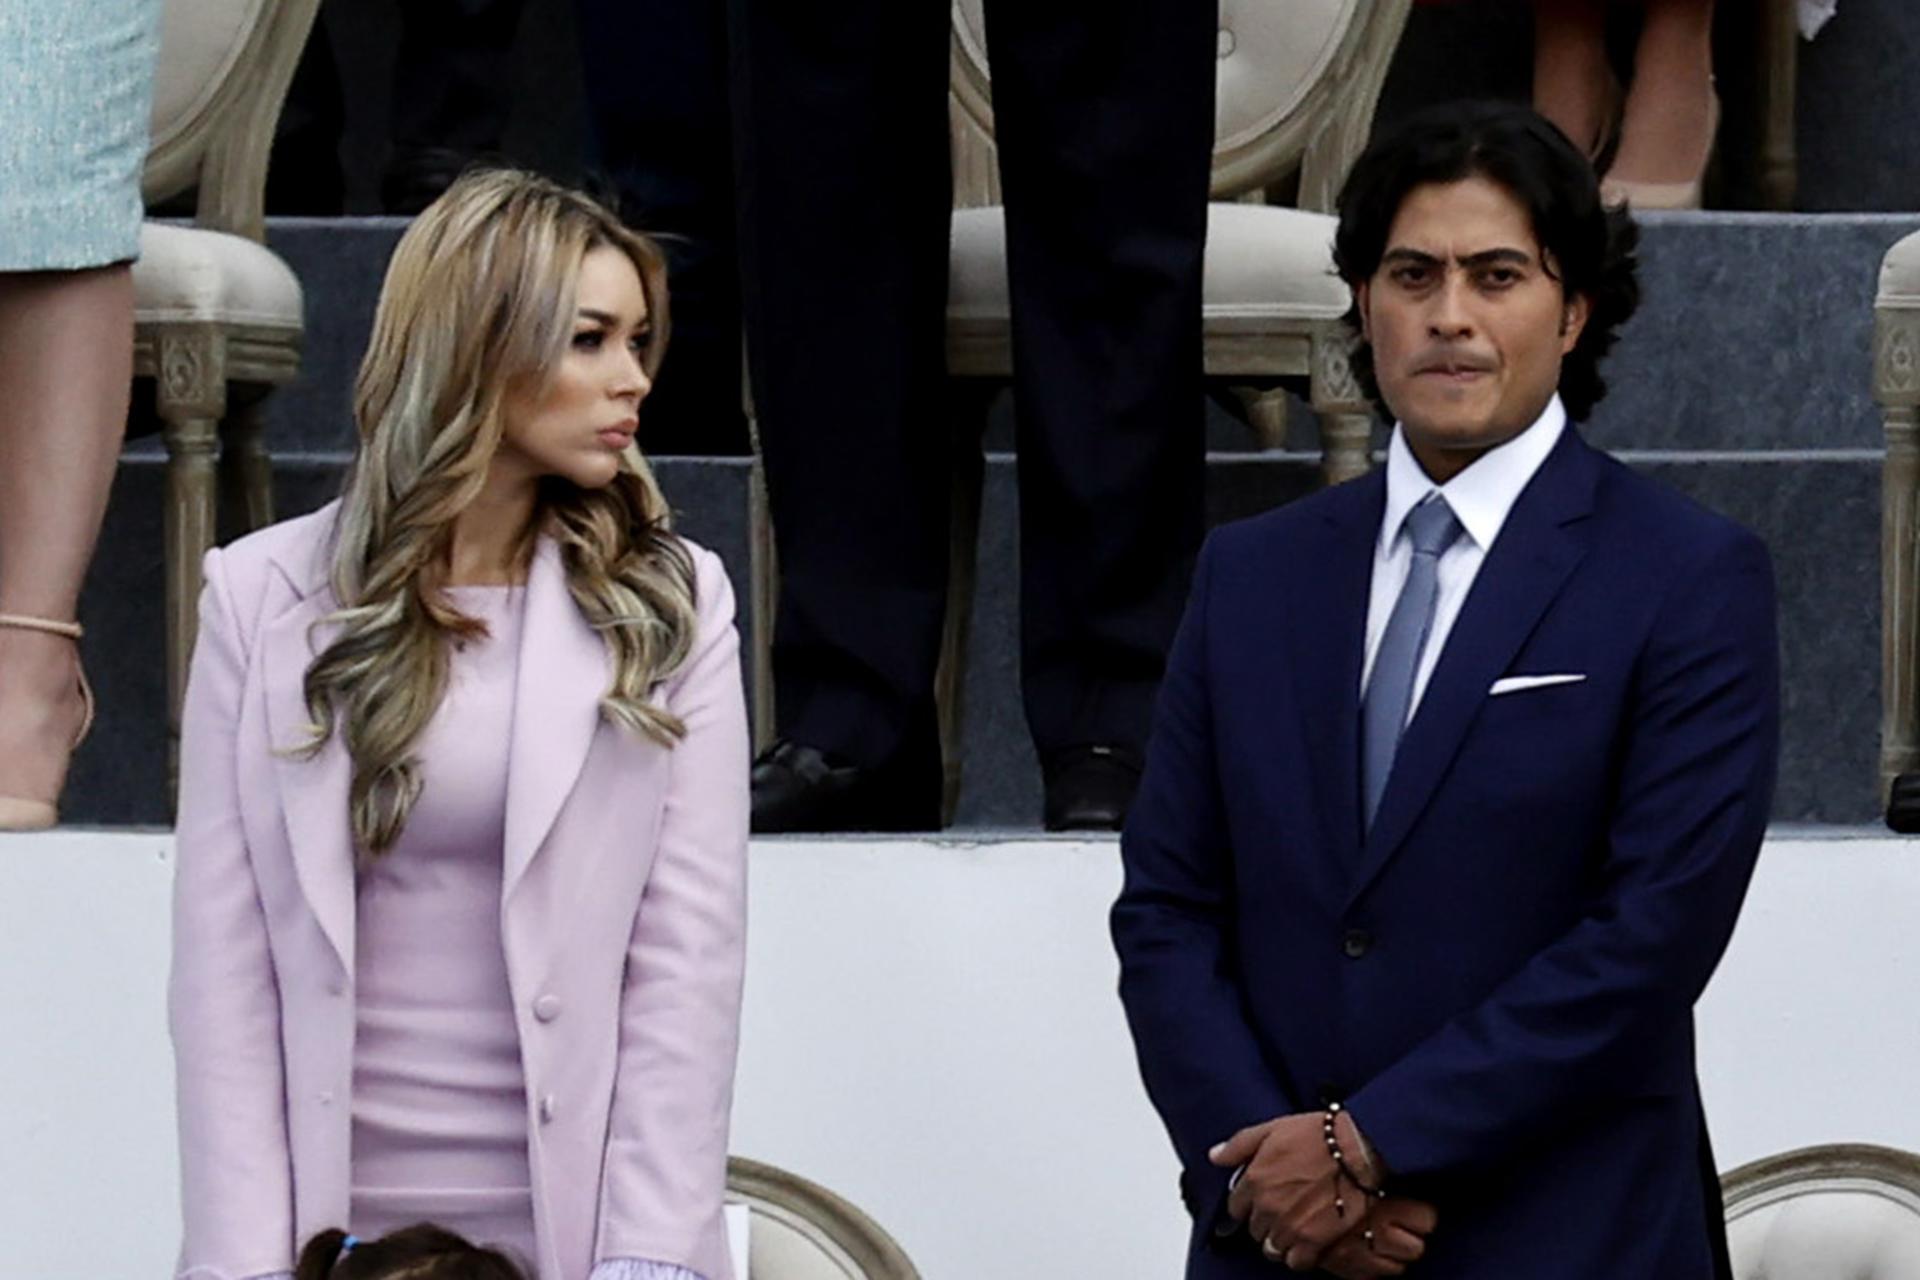 Nicolas Petro Burgos and his then-wife, Daysuris Vasquez, attend the inauguration of his father, Gustavo Petro, as president of Colombia on 7 August 2022. EFE/Mauricio Dueñas Castañeda